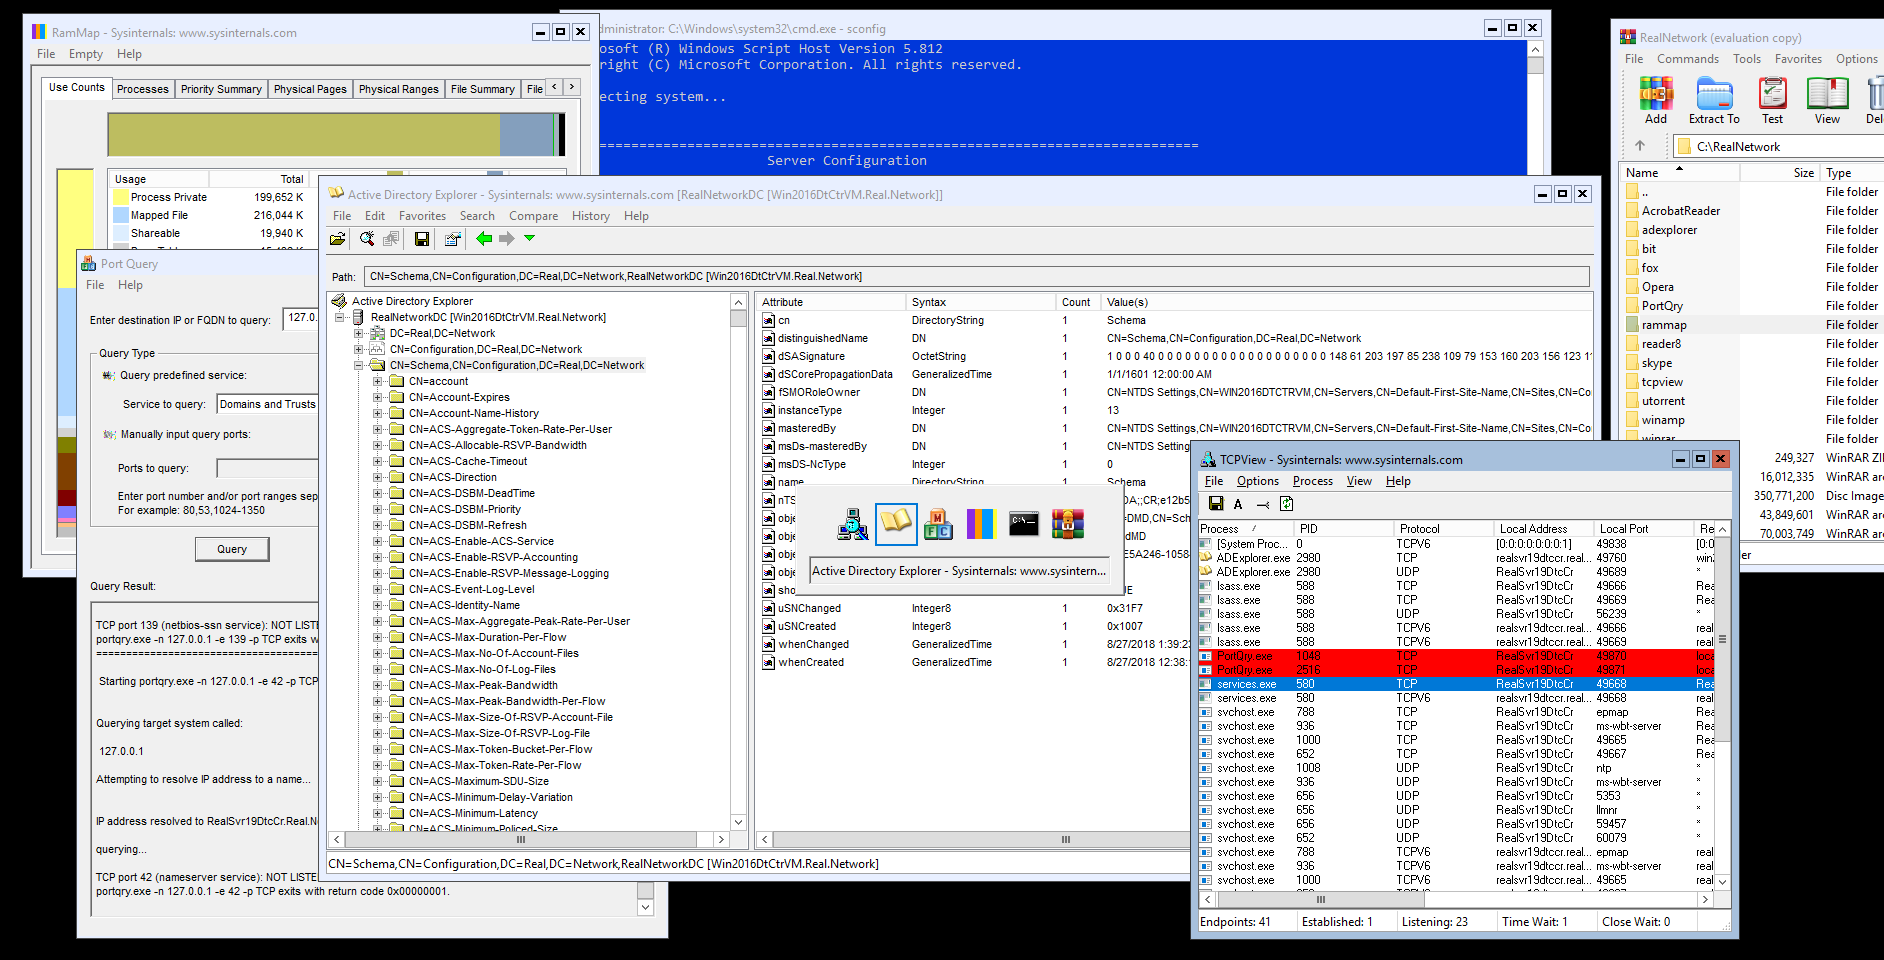 Adding Gui Based Capabilities To Windows Server Core Transformation To 8740